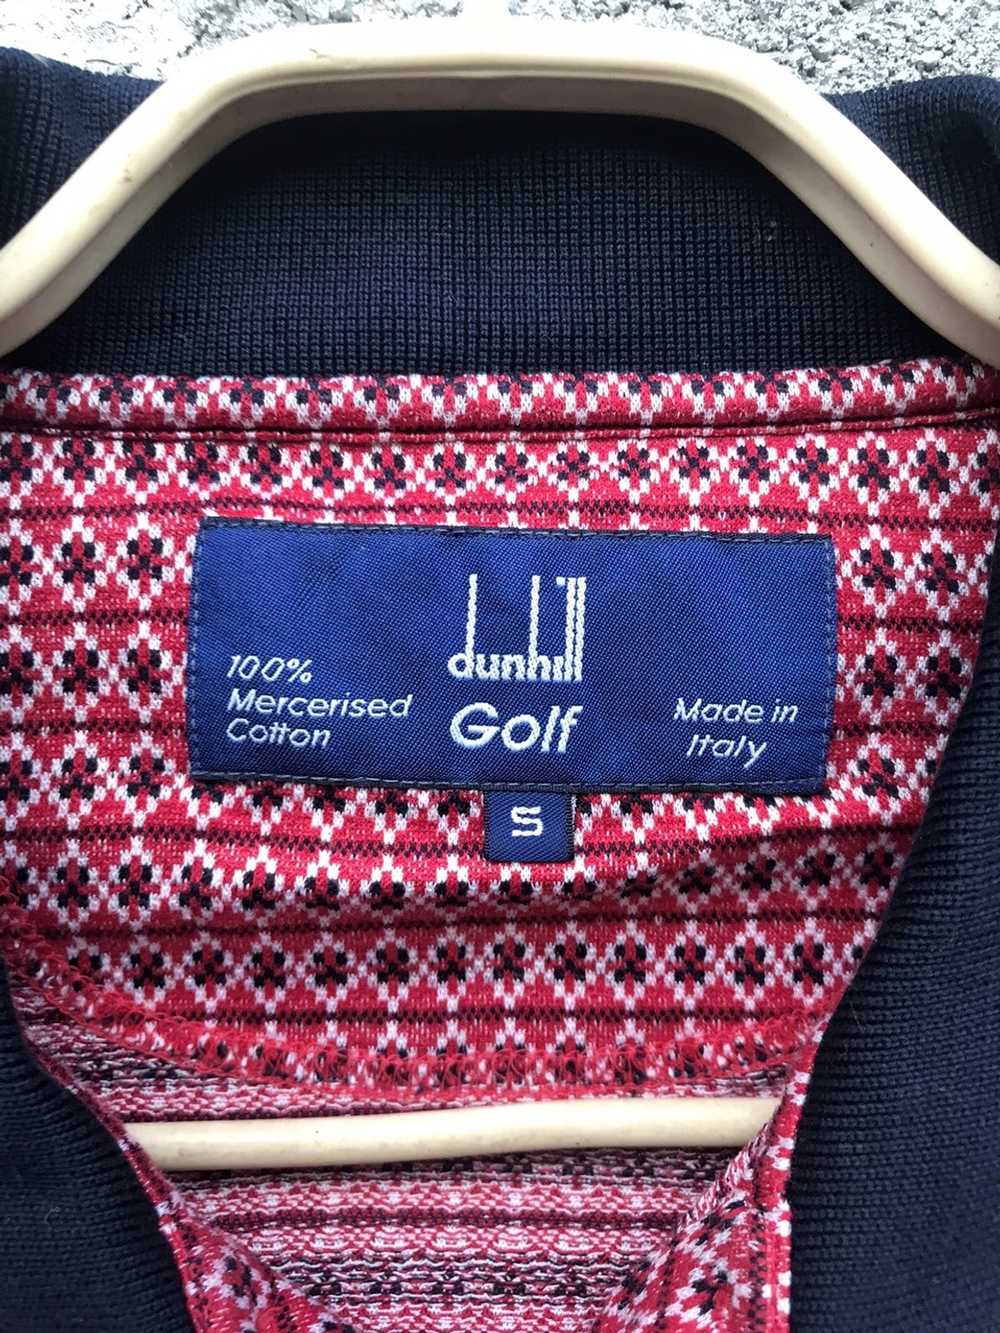 Alfred Dunhill Dunhill golf polo shirt - image 3